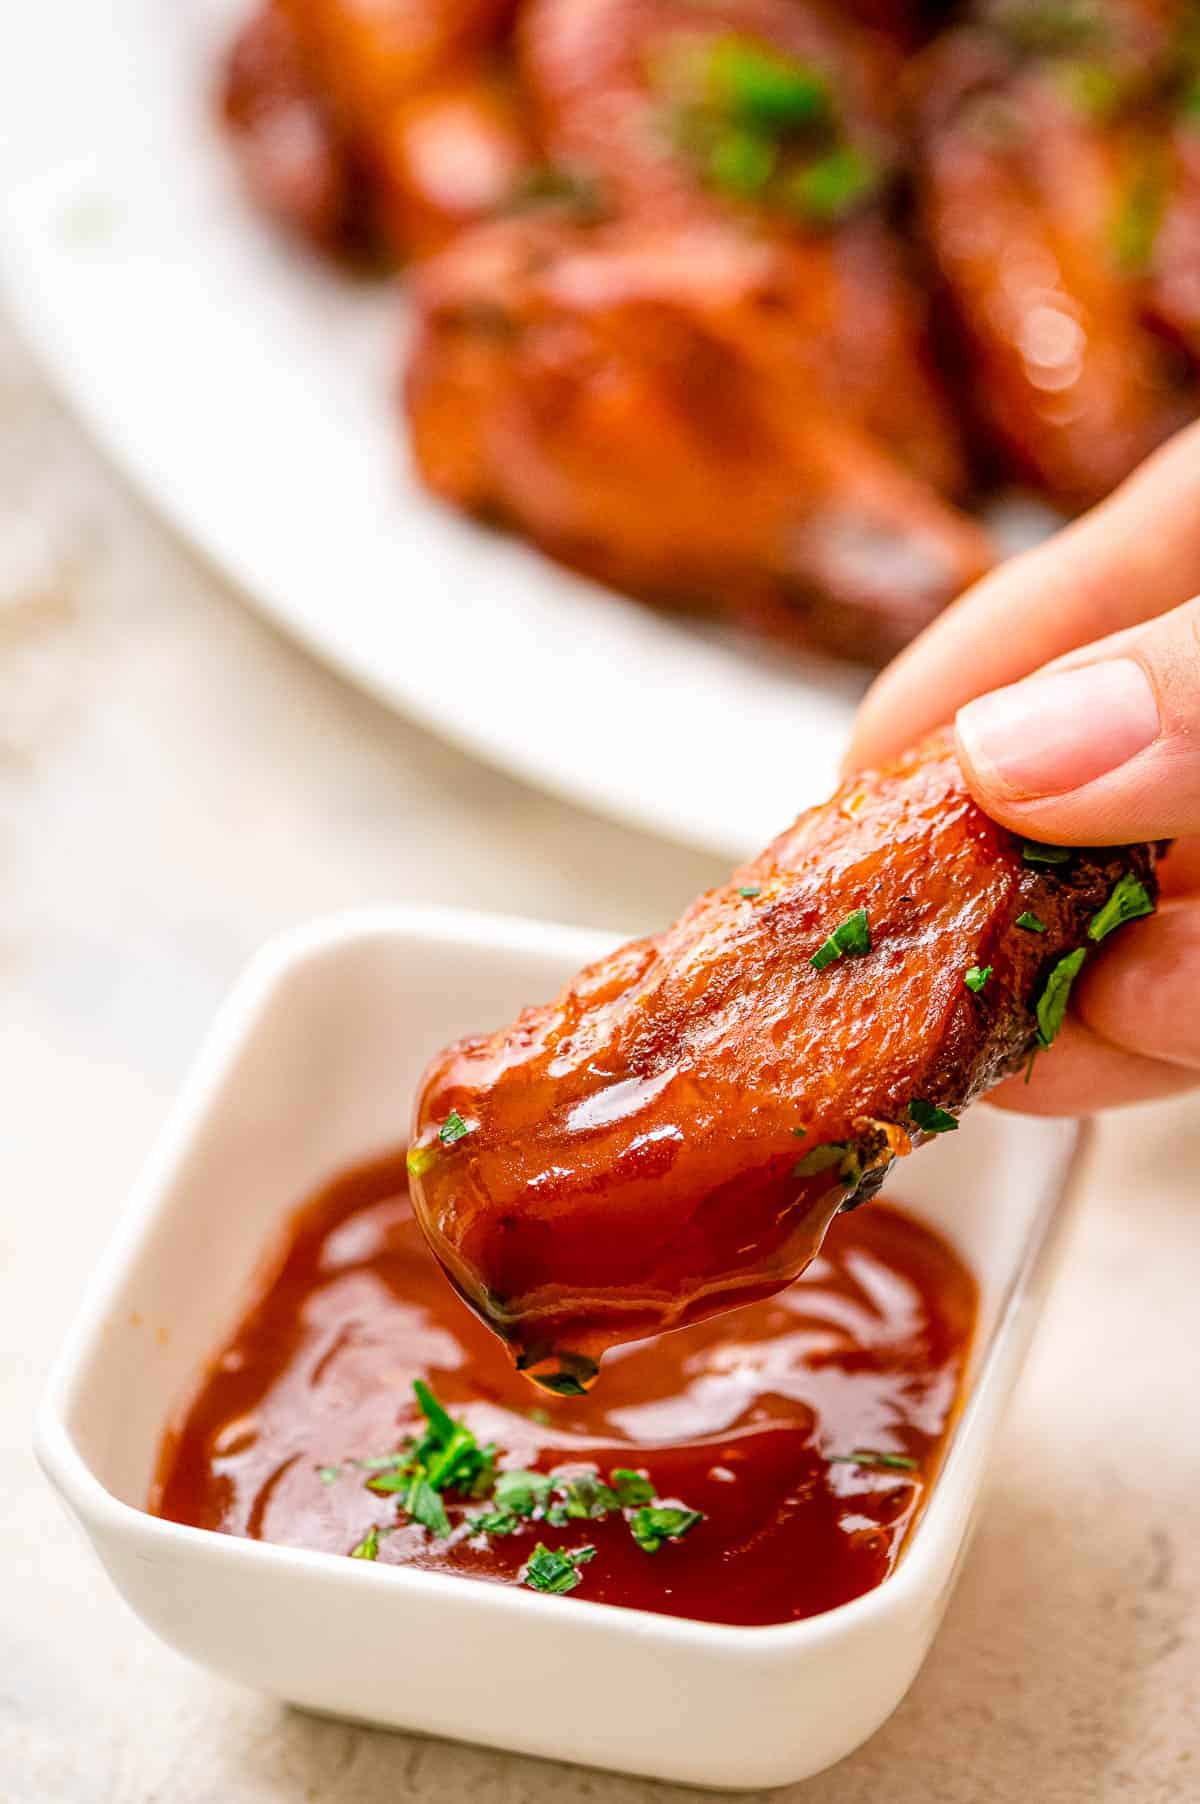 Hand dipping crock pot chicken wing in BBQ sauce